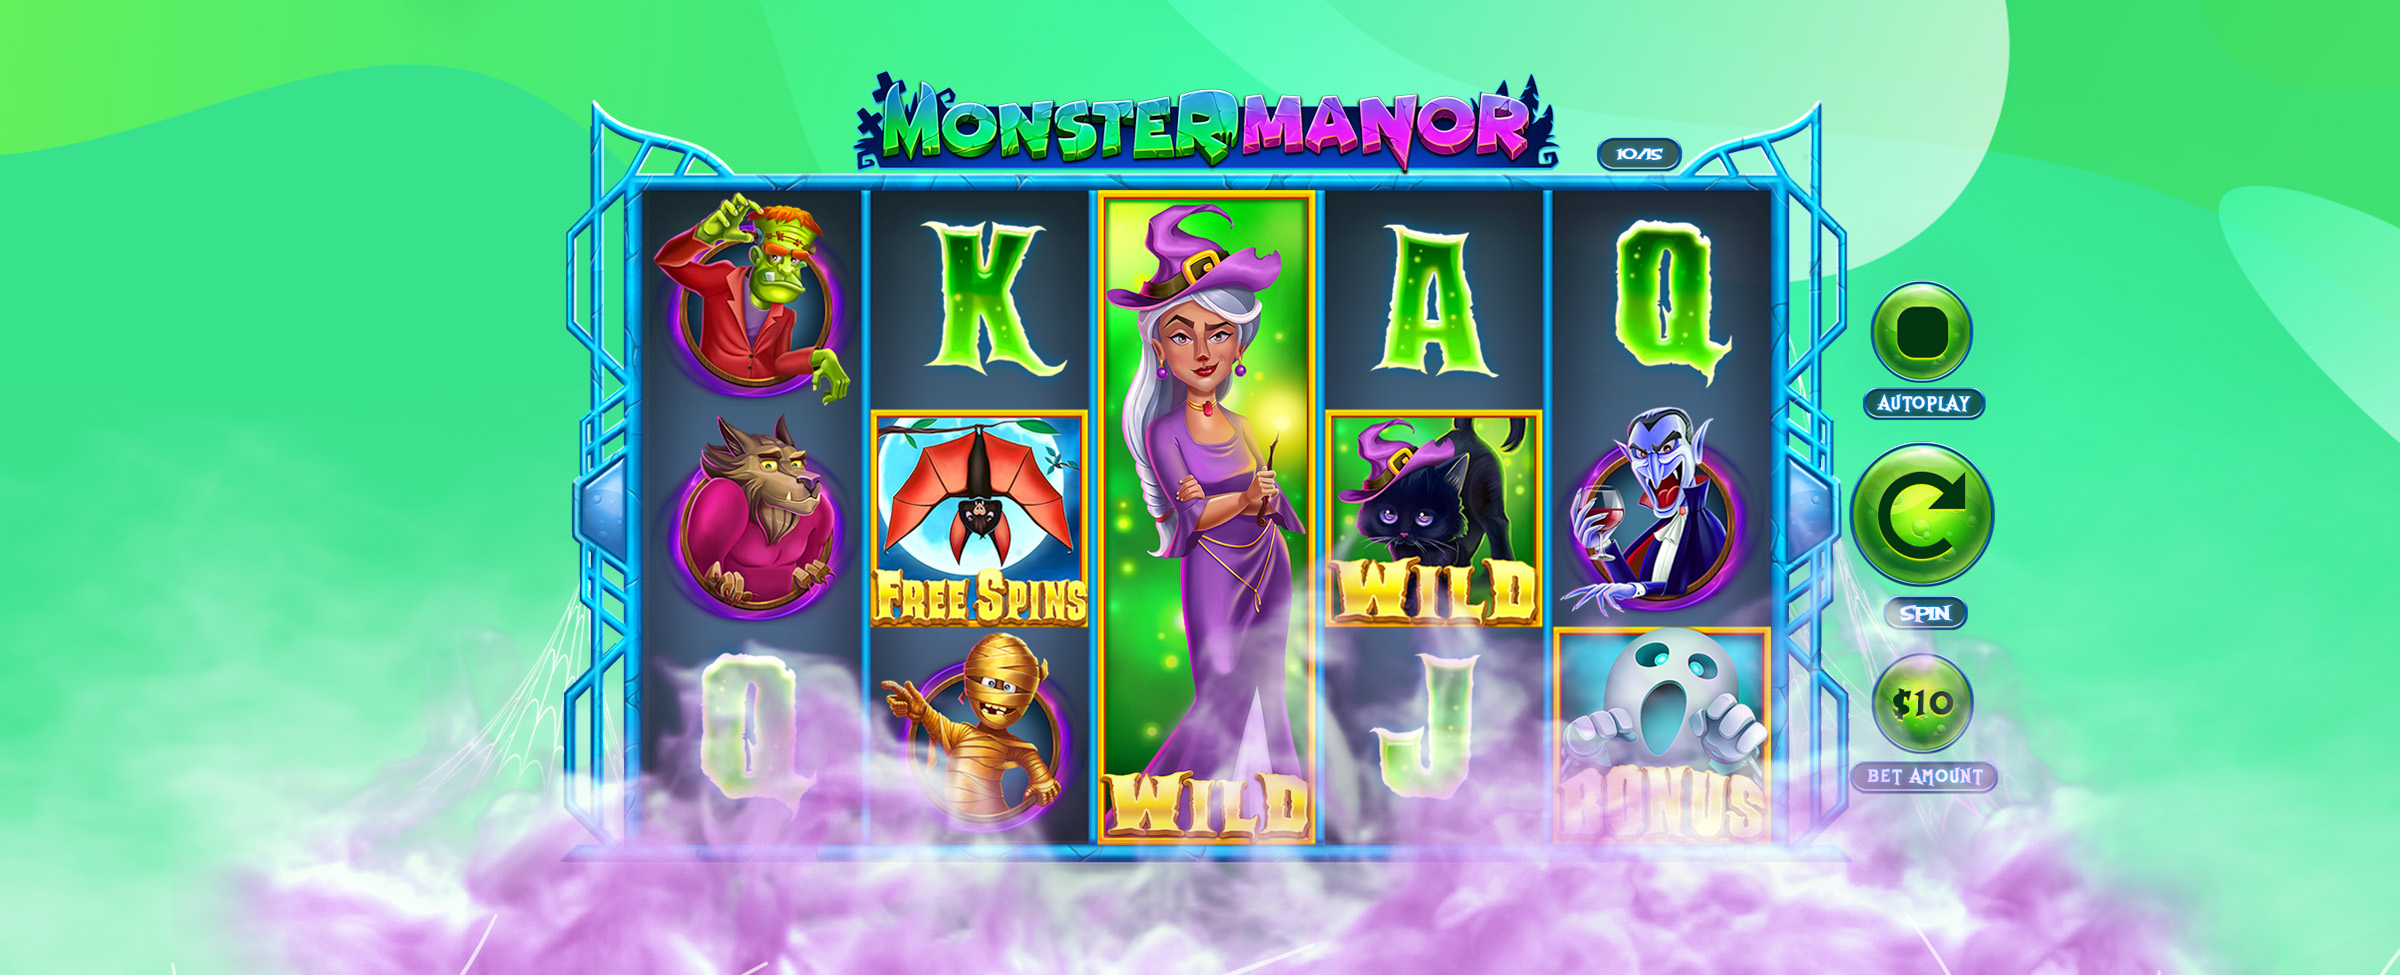 Screen shot from the SlotsLV slot game Monster Manor showing the Wild symbol and other game features and symbols